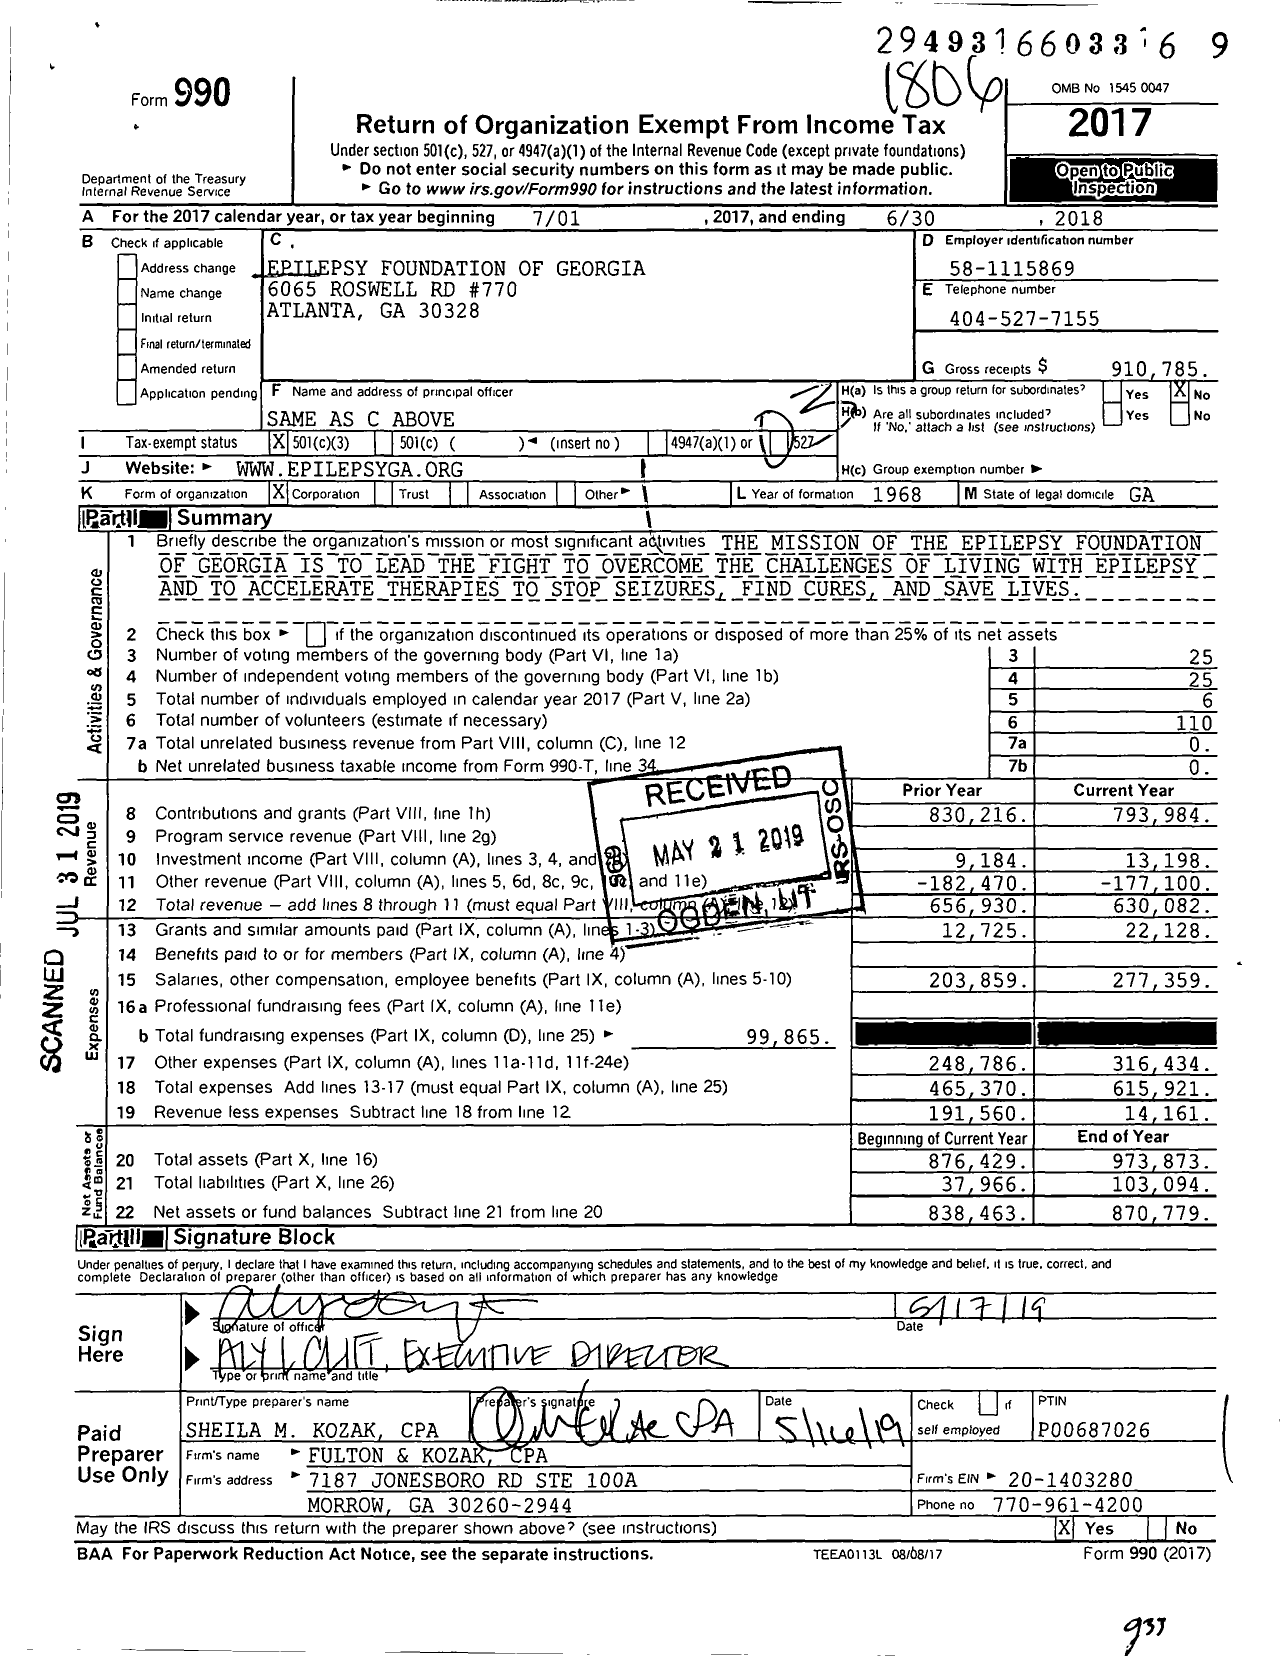 Image of first page of 2017 Form 990 for Epilepsy Foundation of Georgia